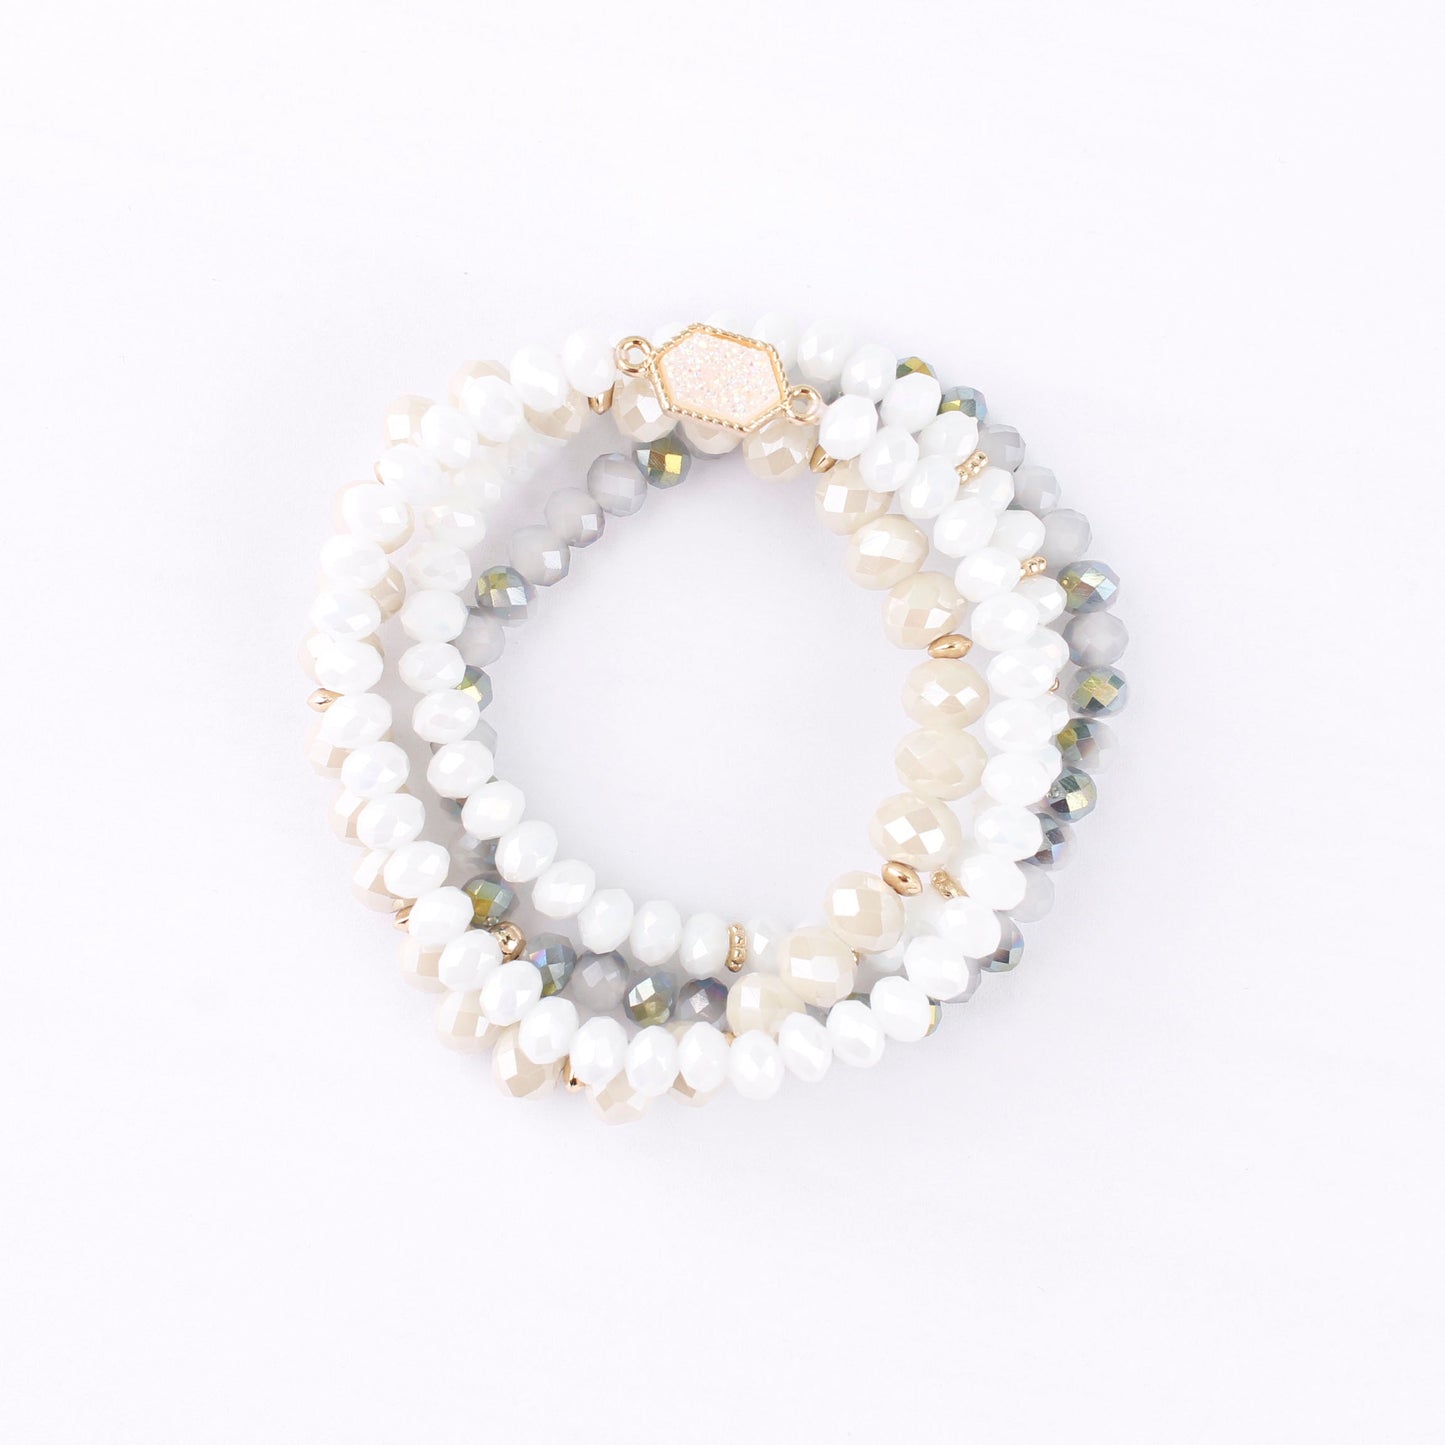 Faceted Natural Stone Glass Beads Elastic Bracelet